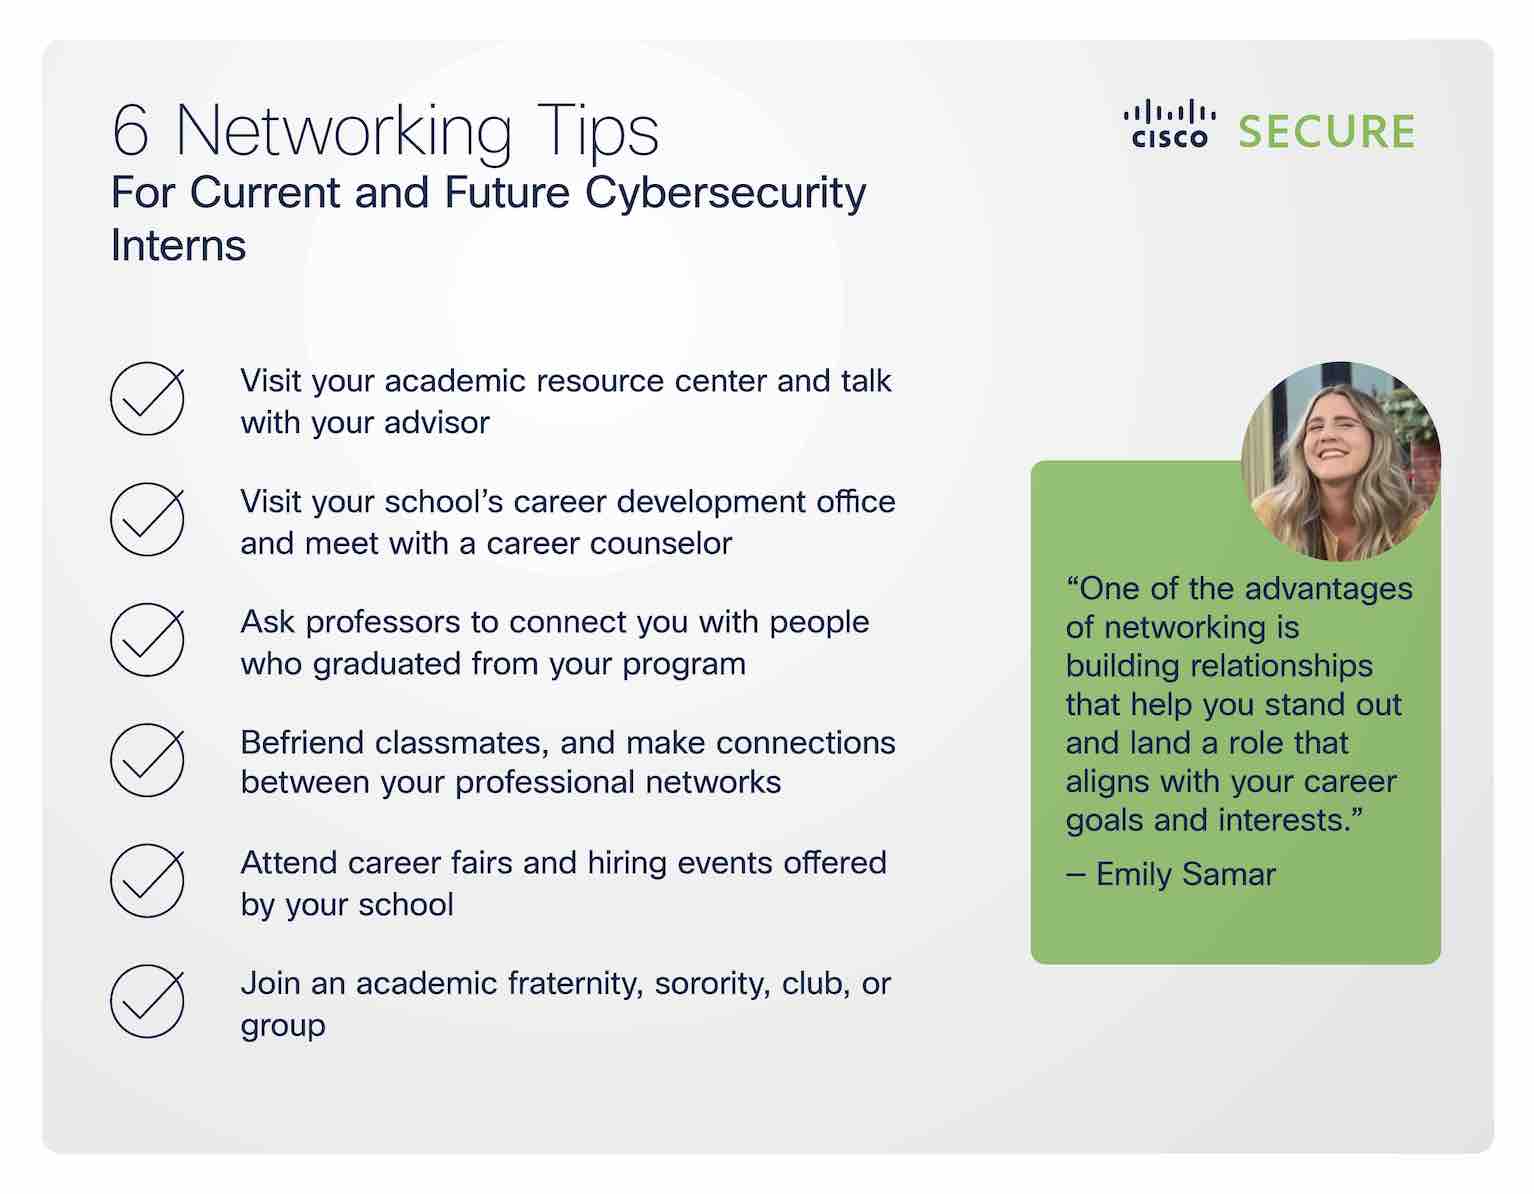 6 Networking Tips for Current and Future Cybersecurity Interns: 1) Visit your academic resource center and talk with your advisor 2) Visit your school's career development office and meet with a career counselor 3) Ask professors to connect you with people who graduated from your program 4) Befriend classmates, and make connections between your professional networks 5) Attend career fairs and hiring events offered by your school 6) Join an academic fraternity, sorority, club, or group